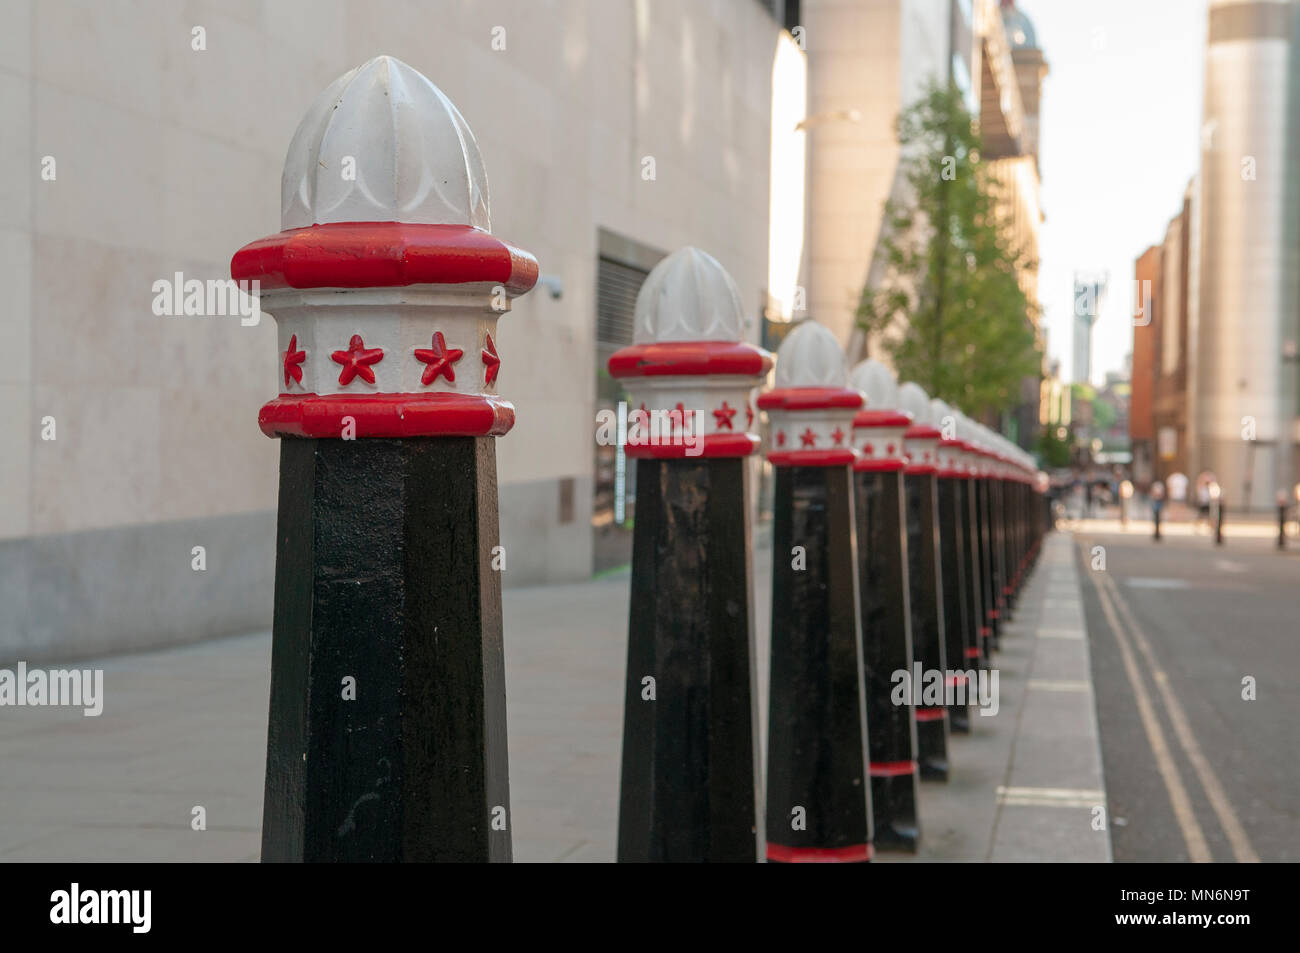 Bollards along a footpath to prevent parking in London. Stock Photo